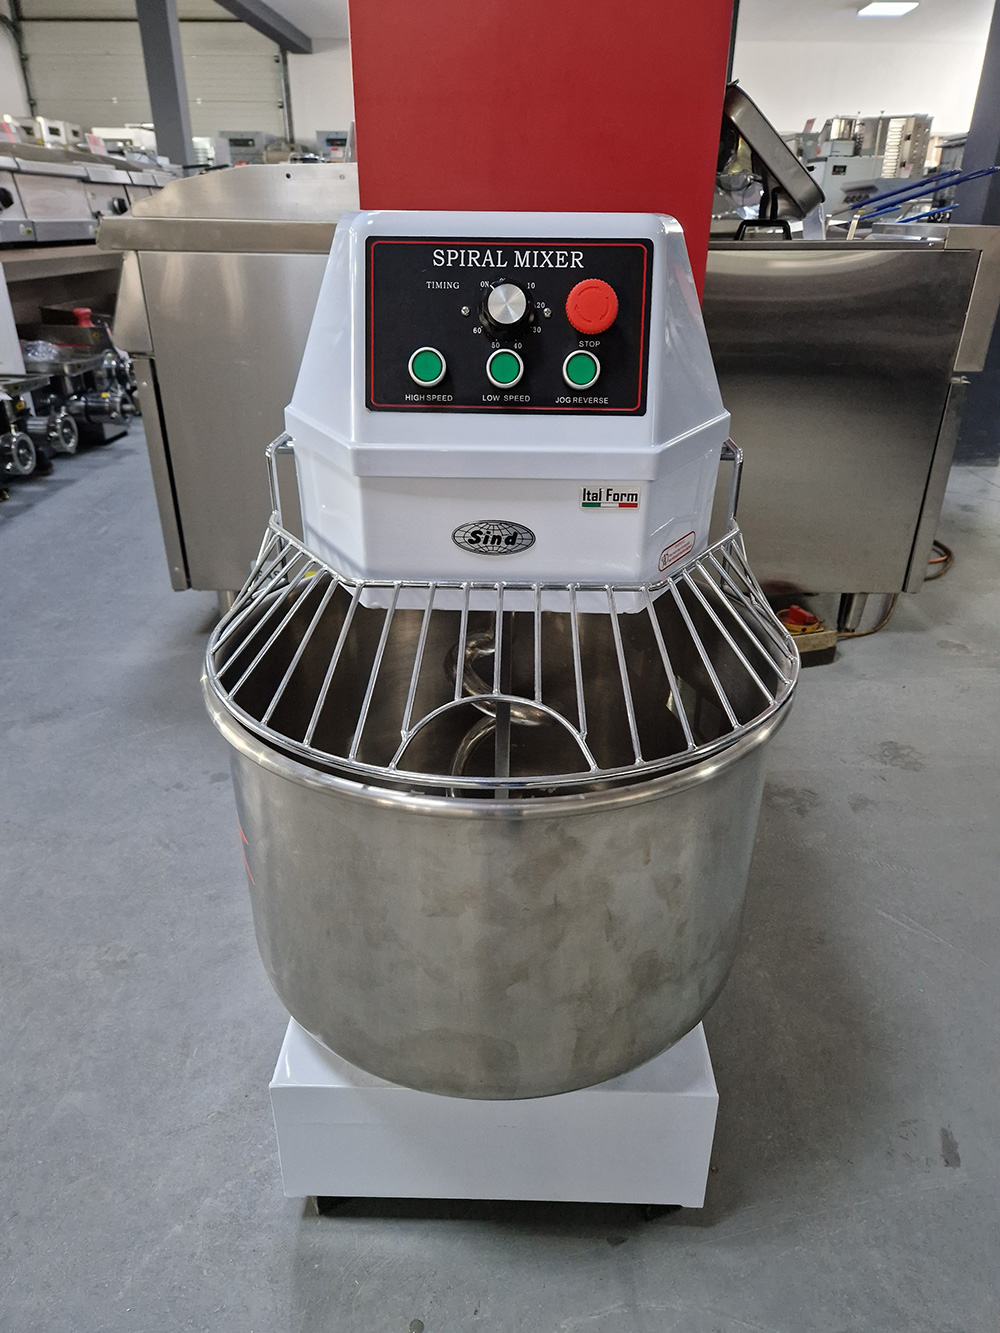 Spiral mixer 20 liters BW20 - Ital Form